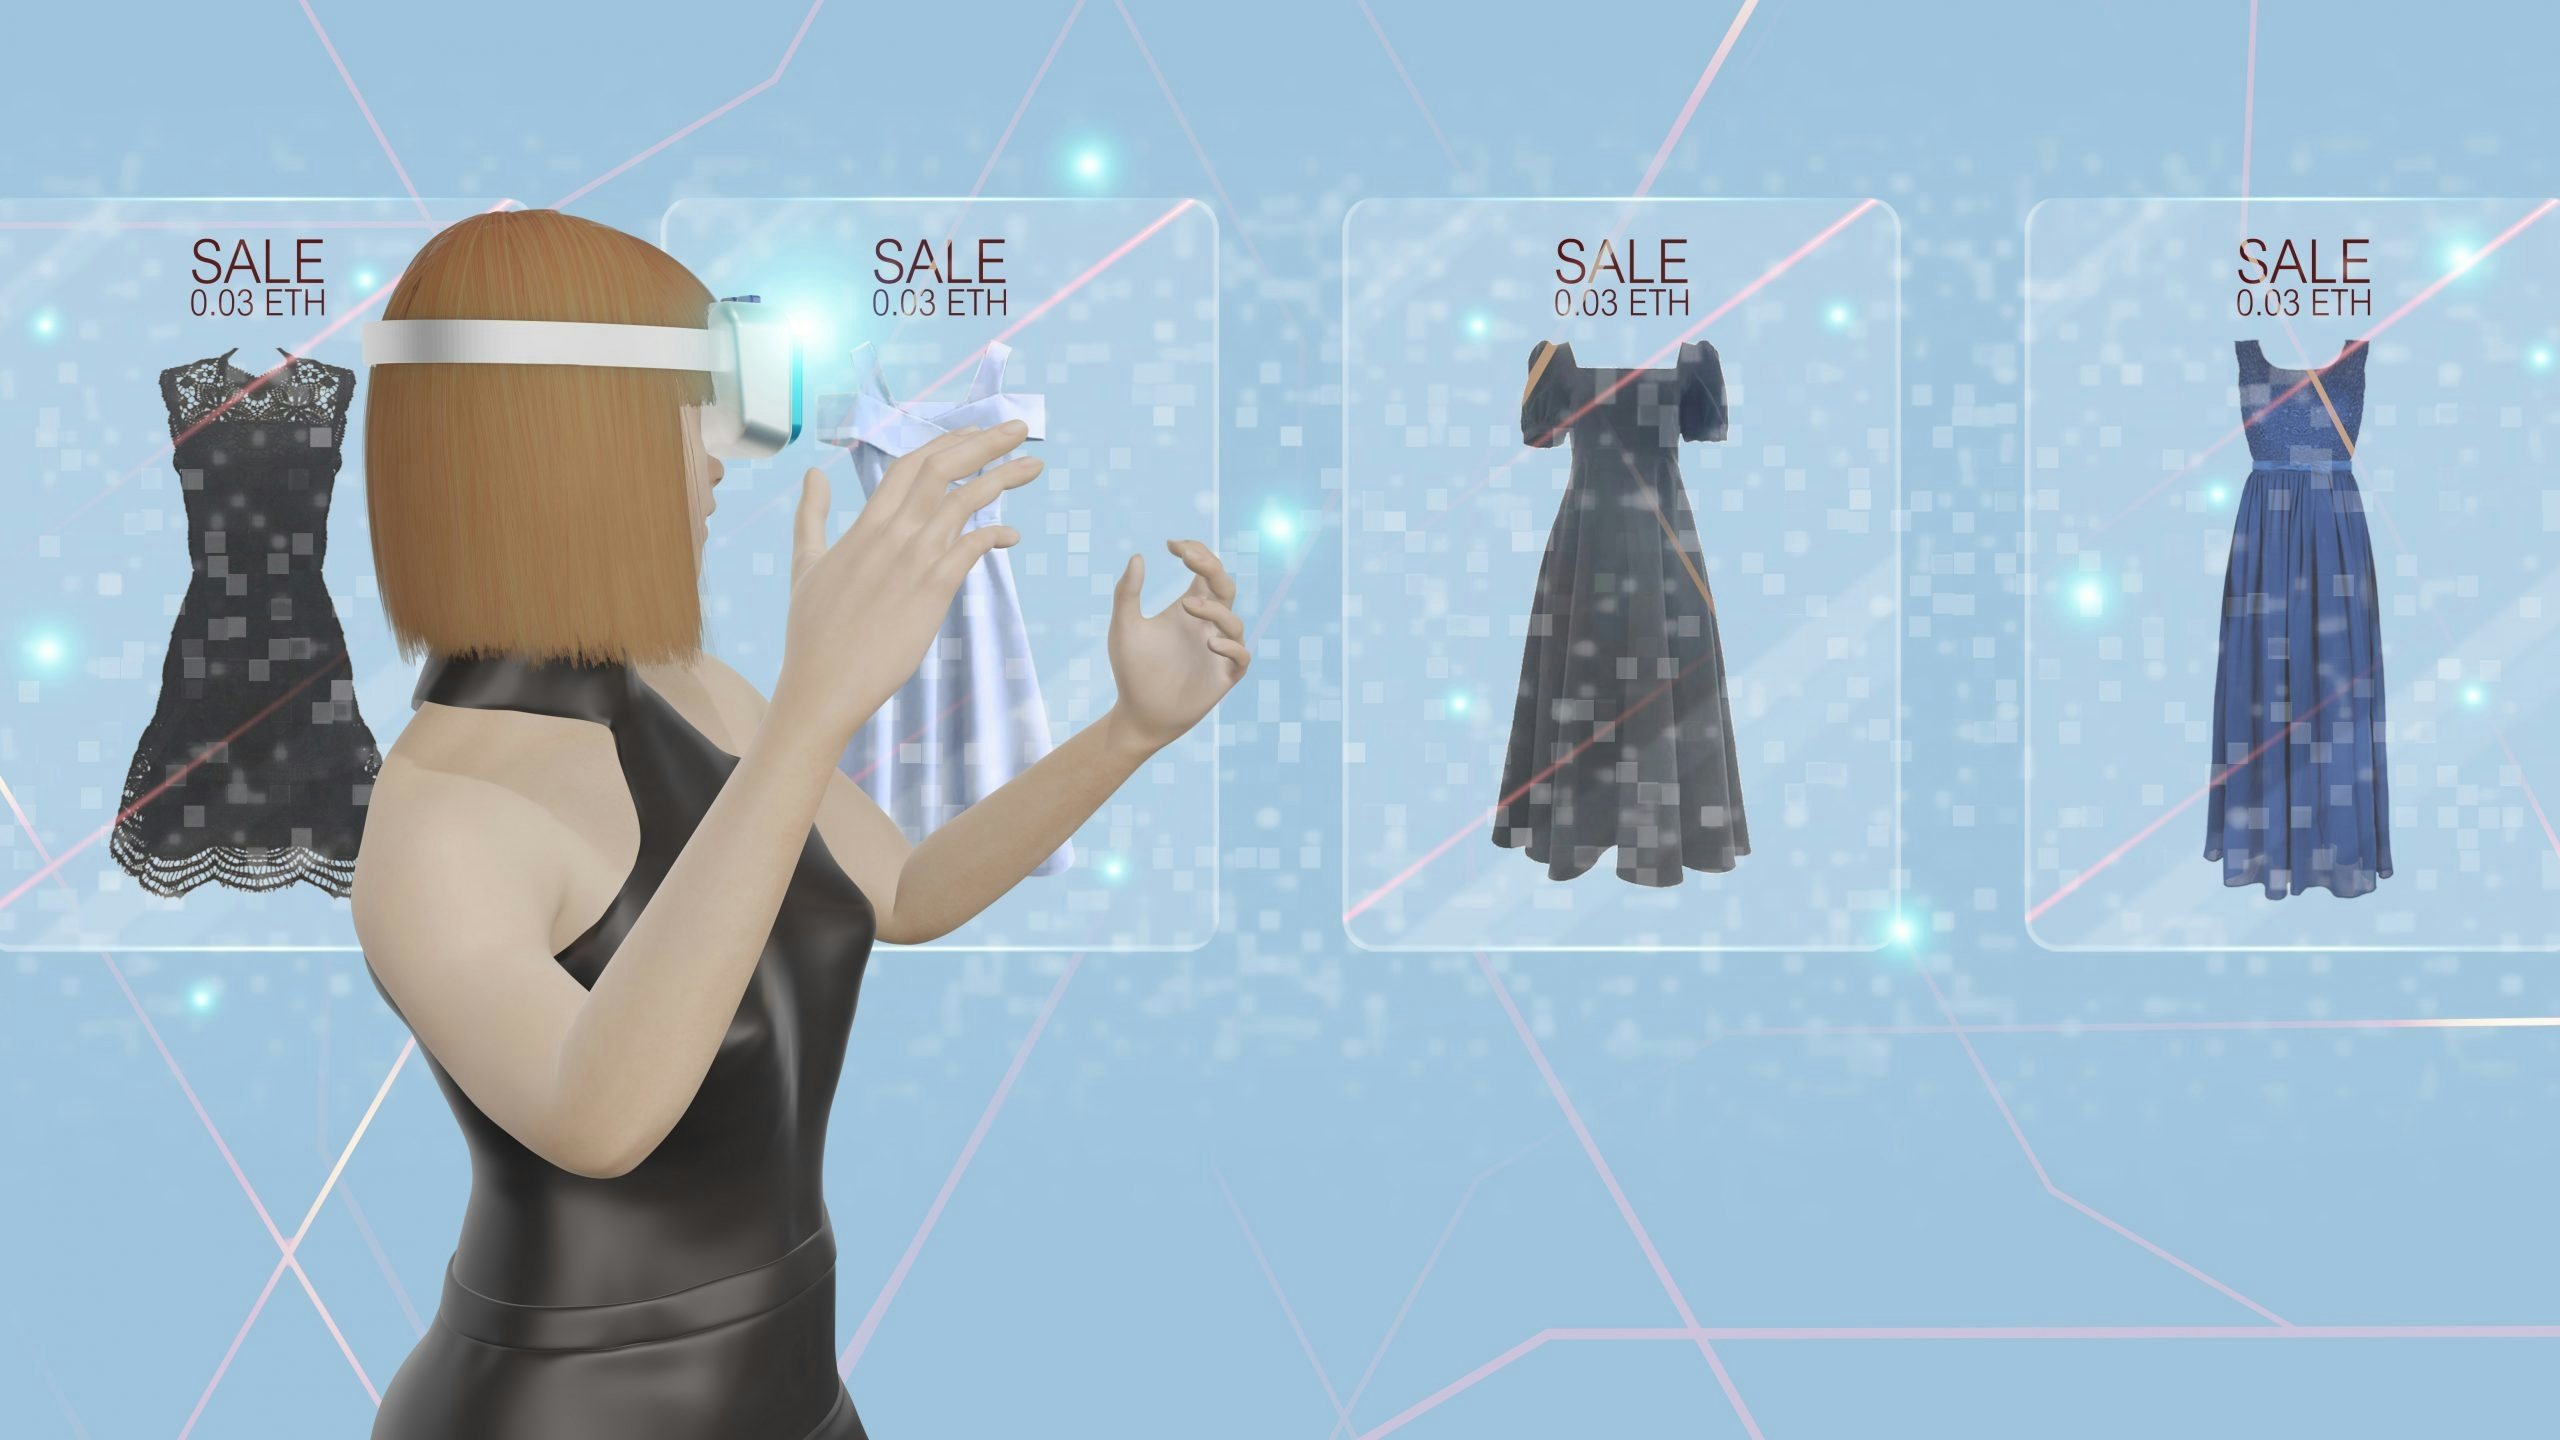 Alibaba Leverages the Metaverse to Offer 'Multi-Dimensional